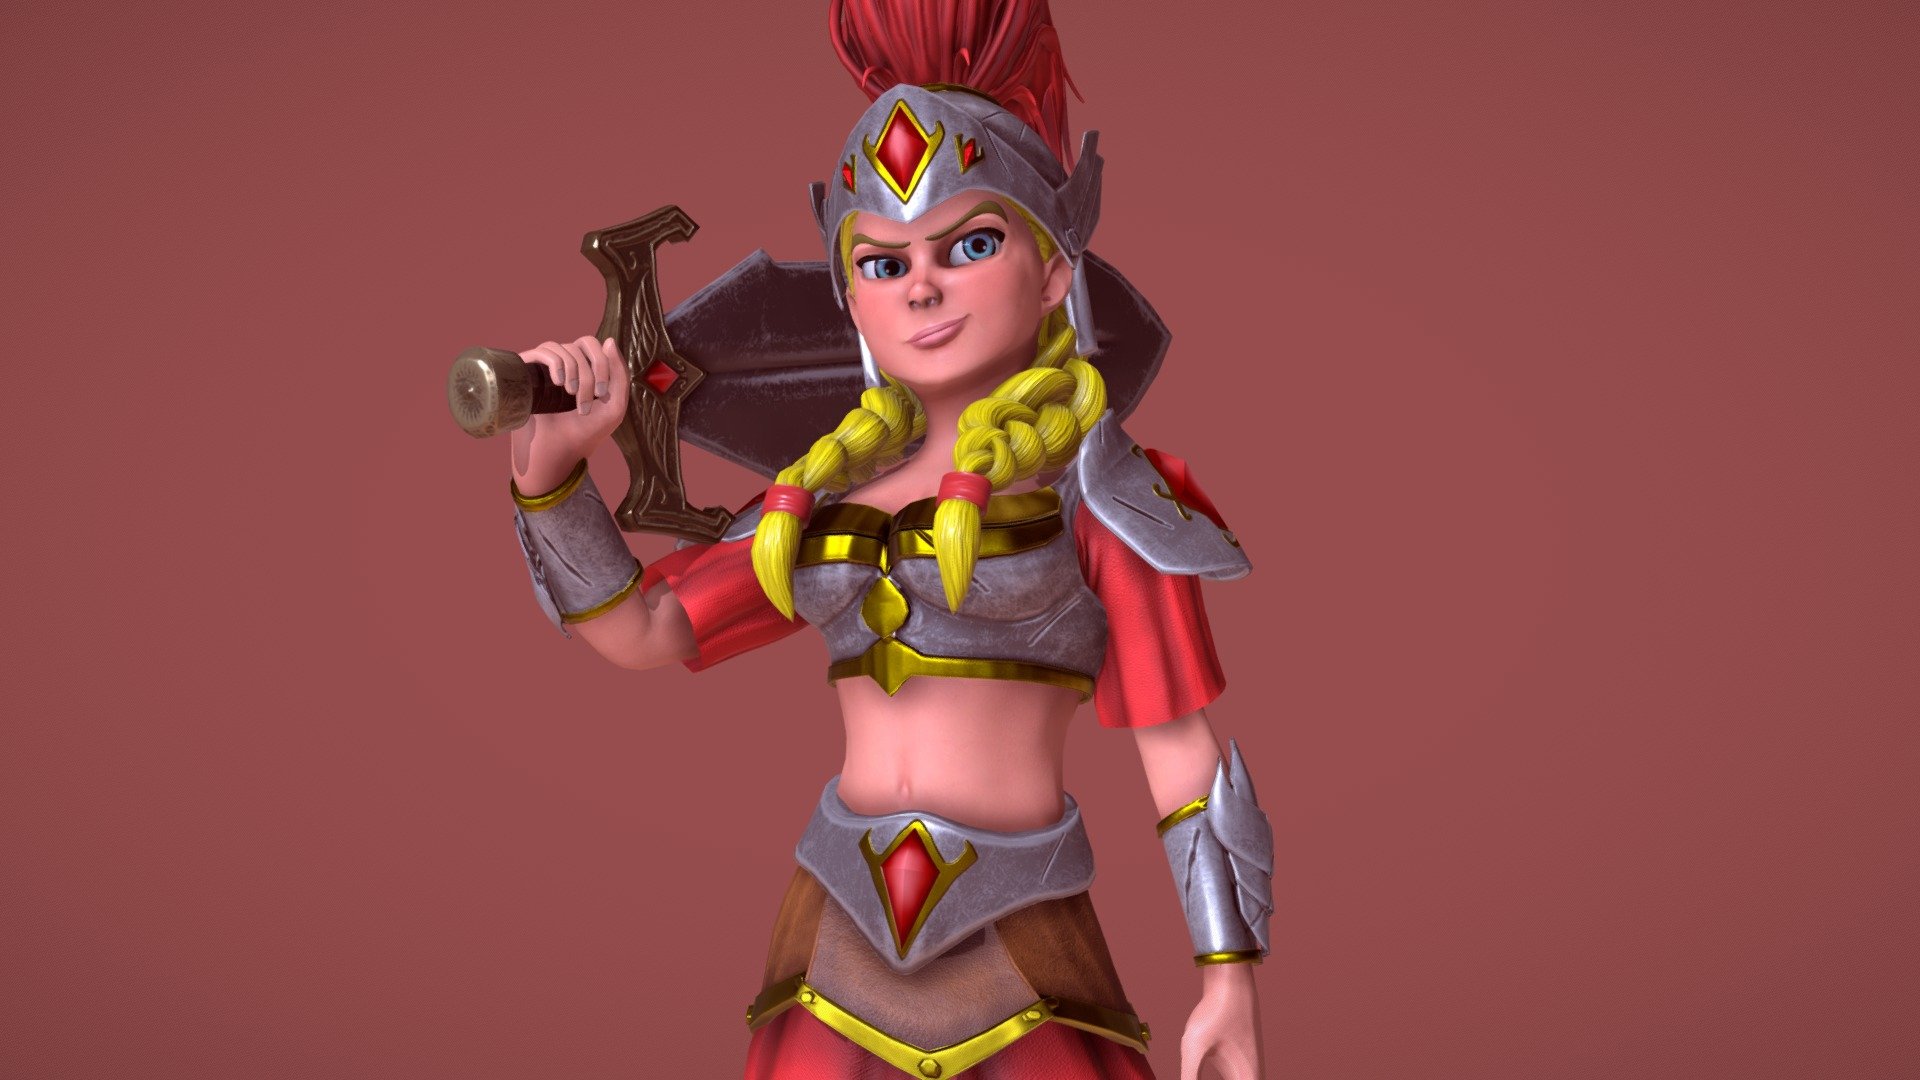 Character from Cassiodora

Model render: https://www.artstation.com/artwork/baW0qn

Wishlist Now on Steam: https://store.steampowered.com/agecheck/app/1708550/ - Agni - 3D model by paulo_nathan 3d model